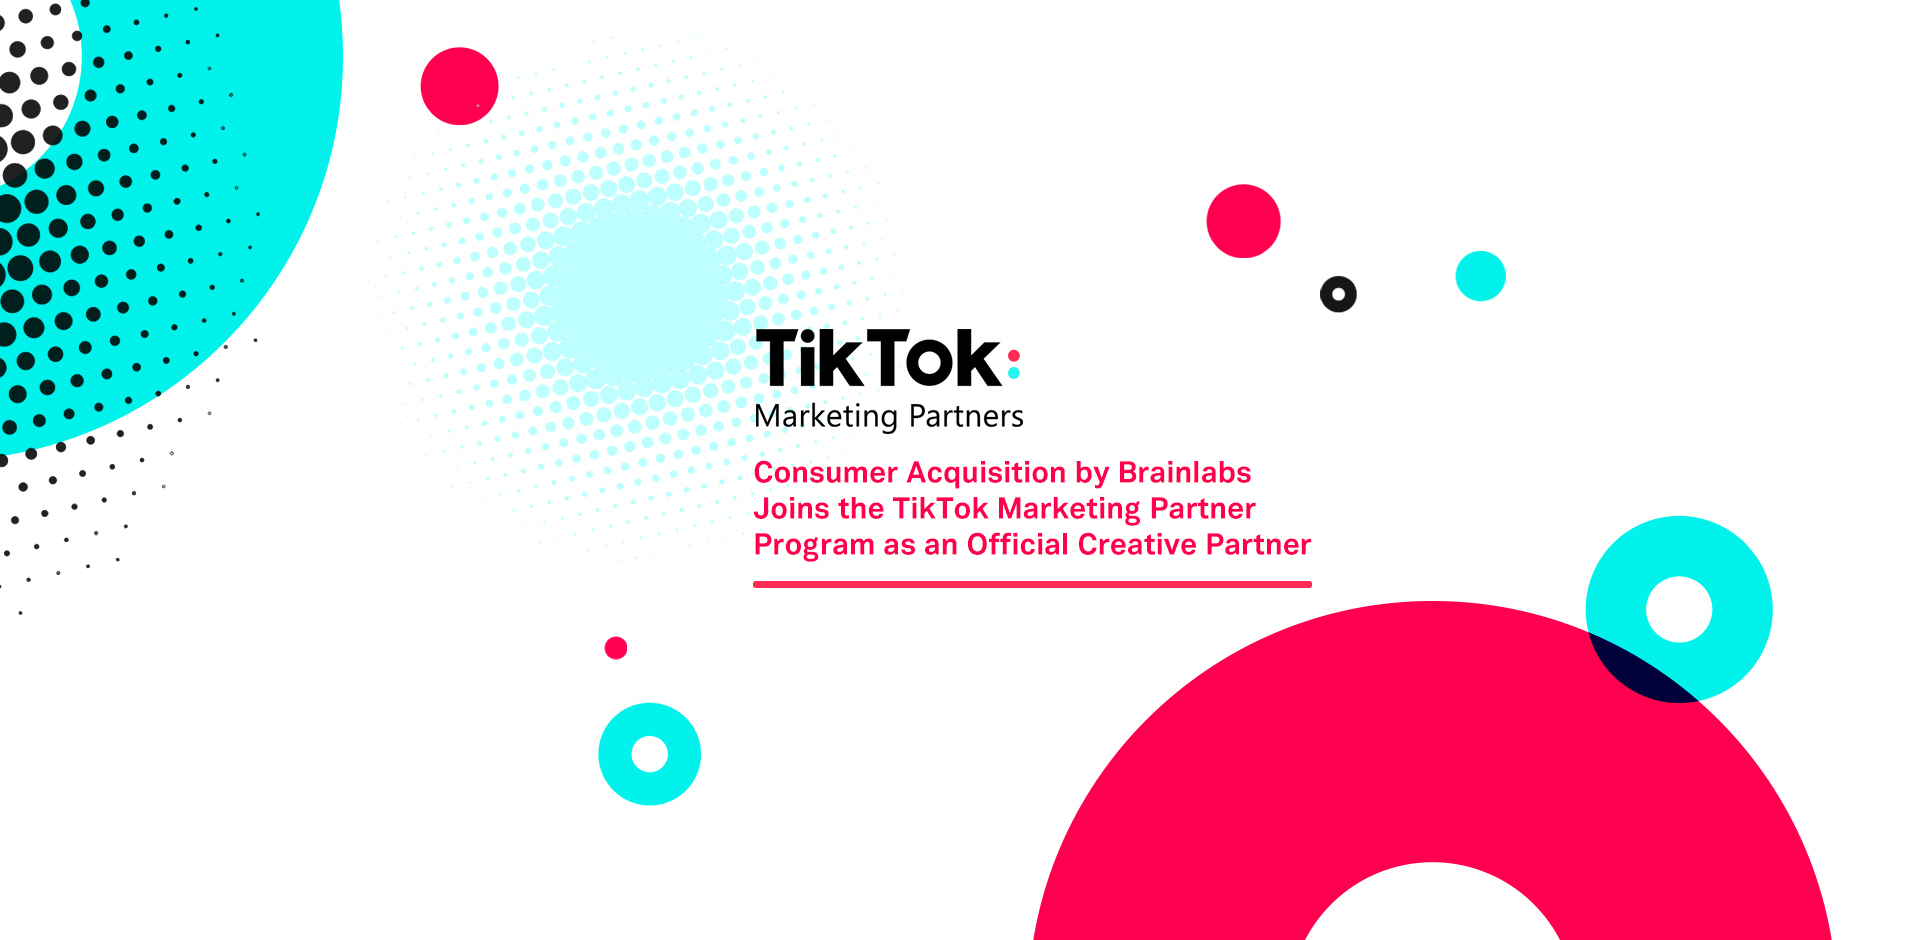 Consumer Acquisition by Brainlabs Joins TikTok Marketing Partner Program as an Official Creative Partner